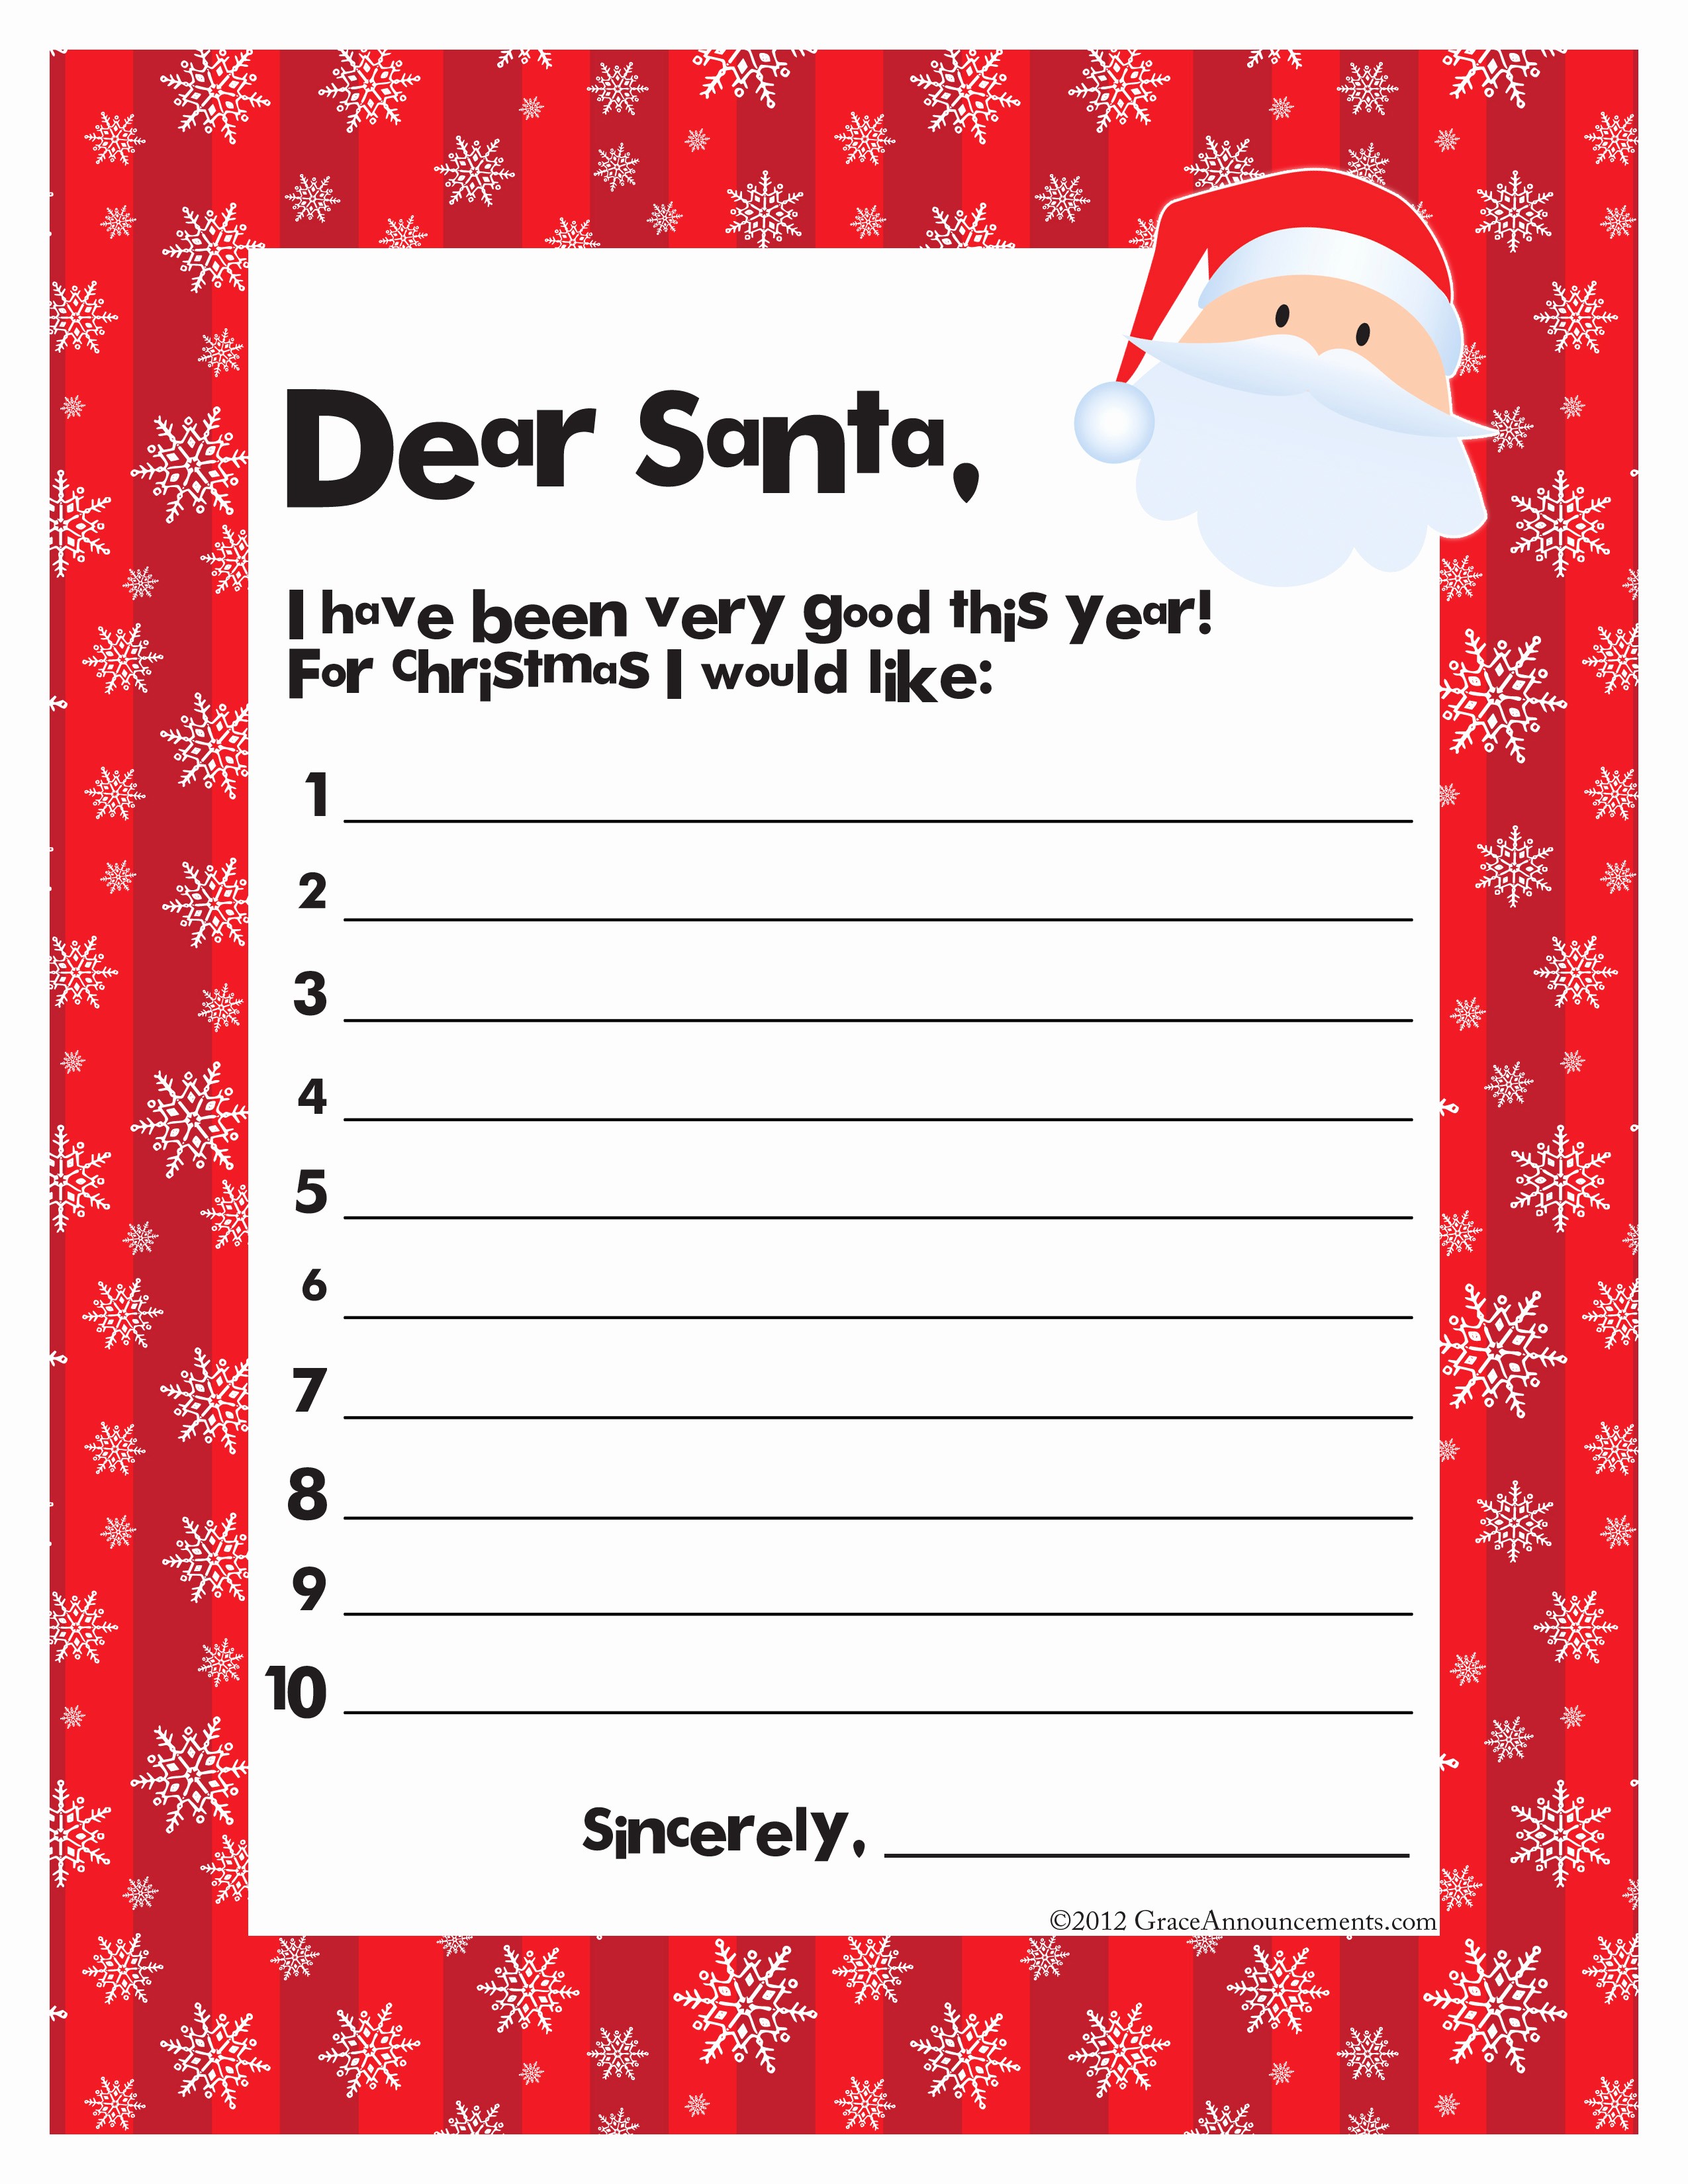 Letter to Santa Claus Templates New Santa Claus Letter Template